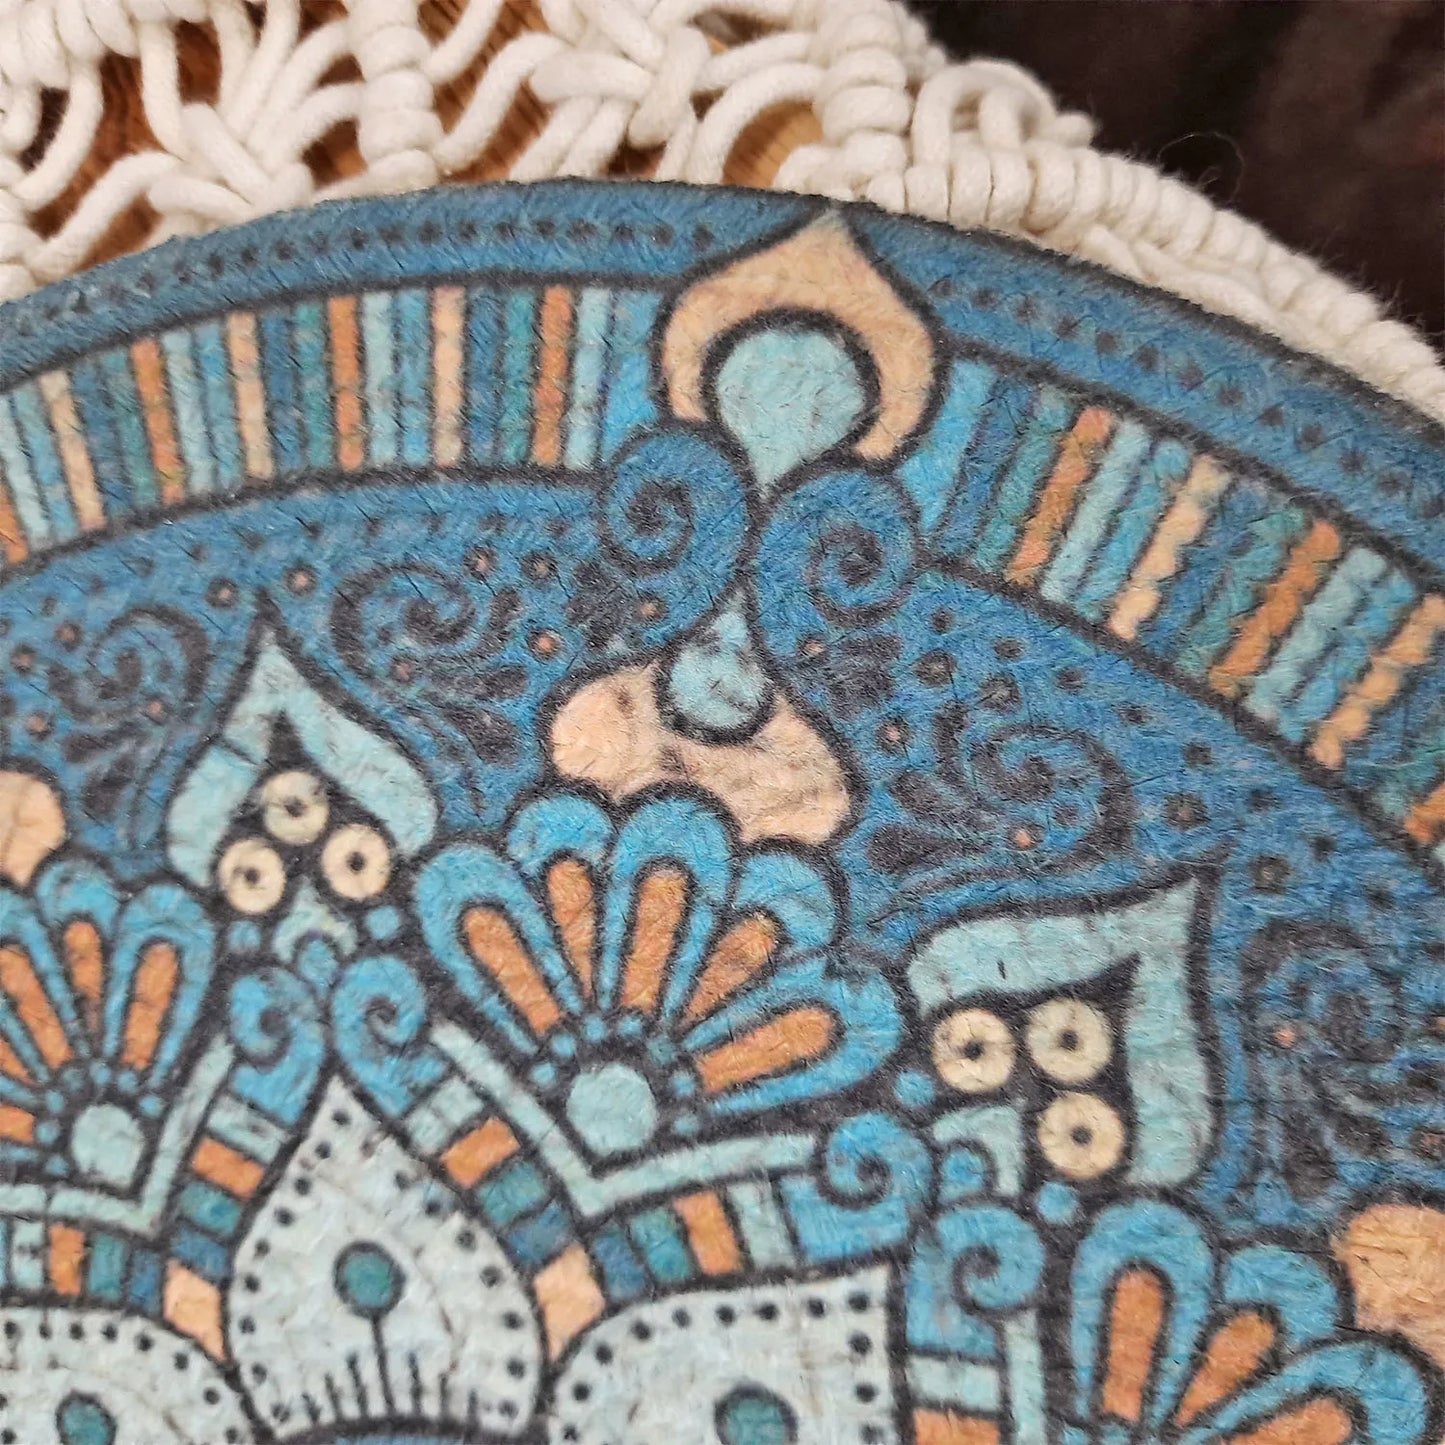 All Natural Round Cotton Braided Placemats – Blue Ethnic Art